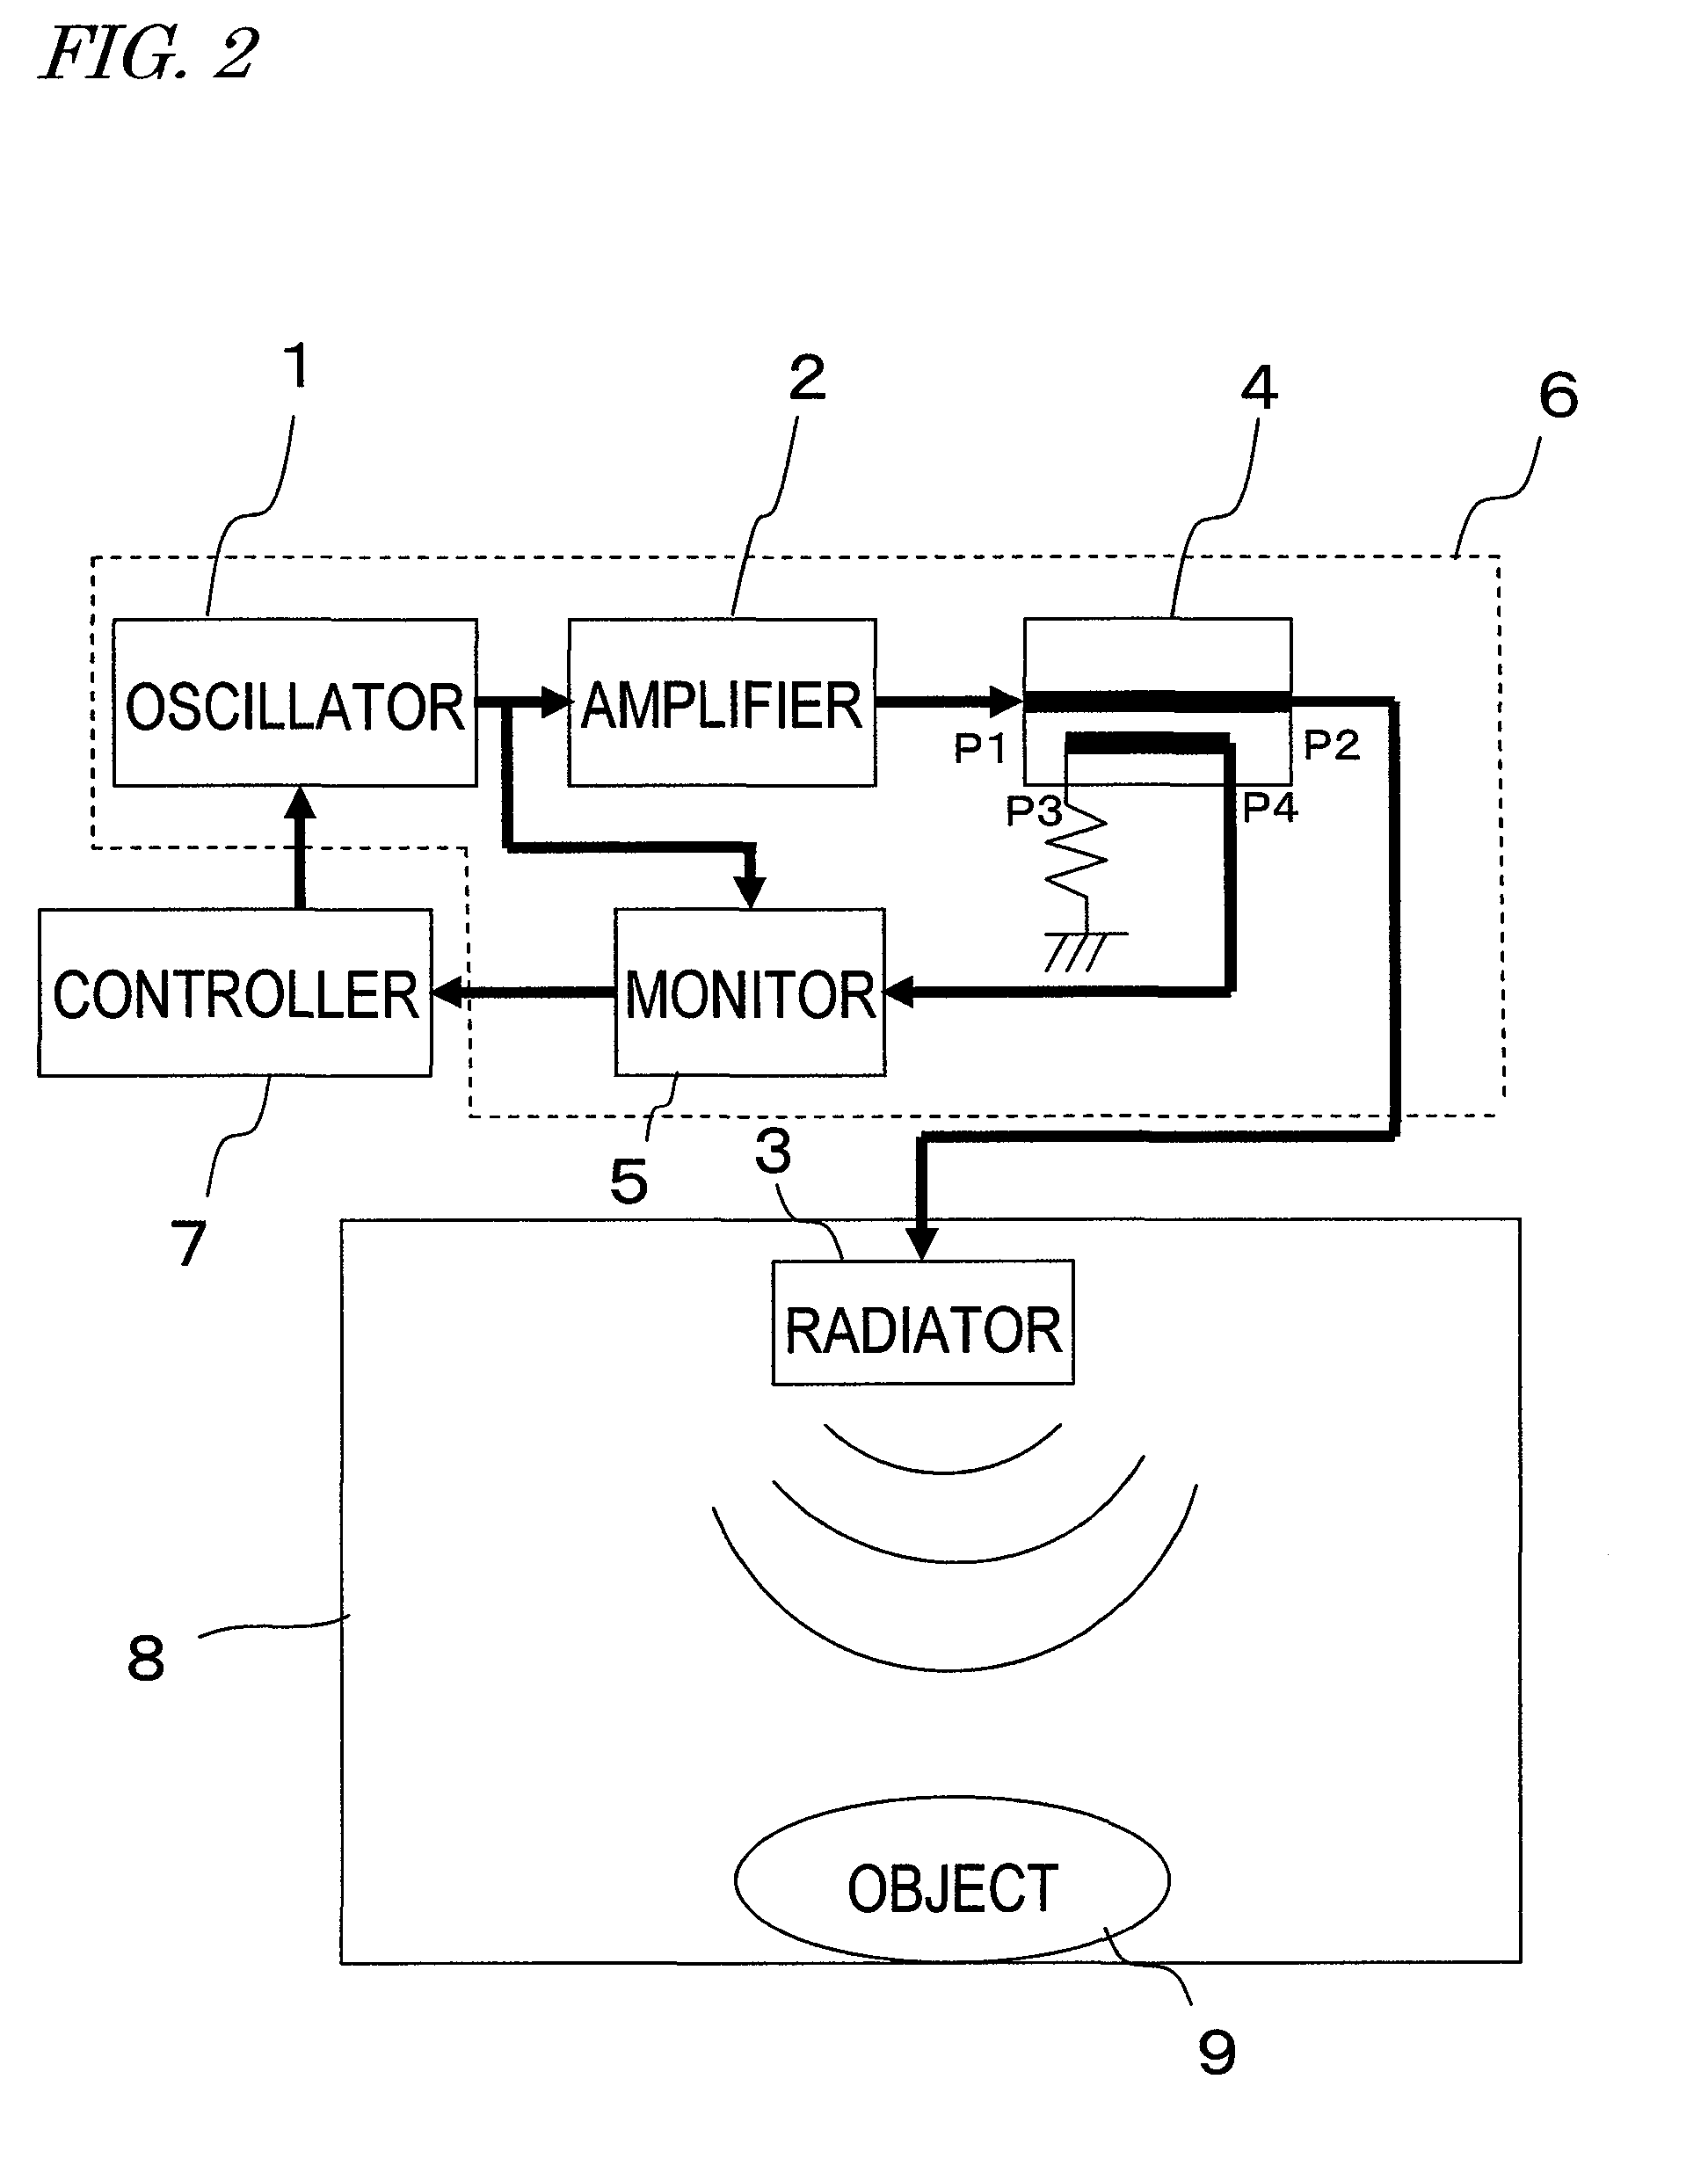 Spread-spectrum high-frequency heating device